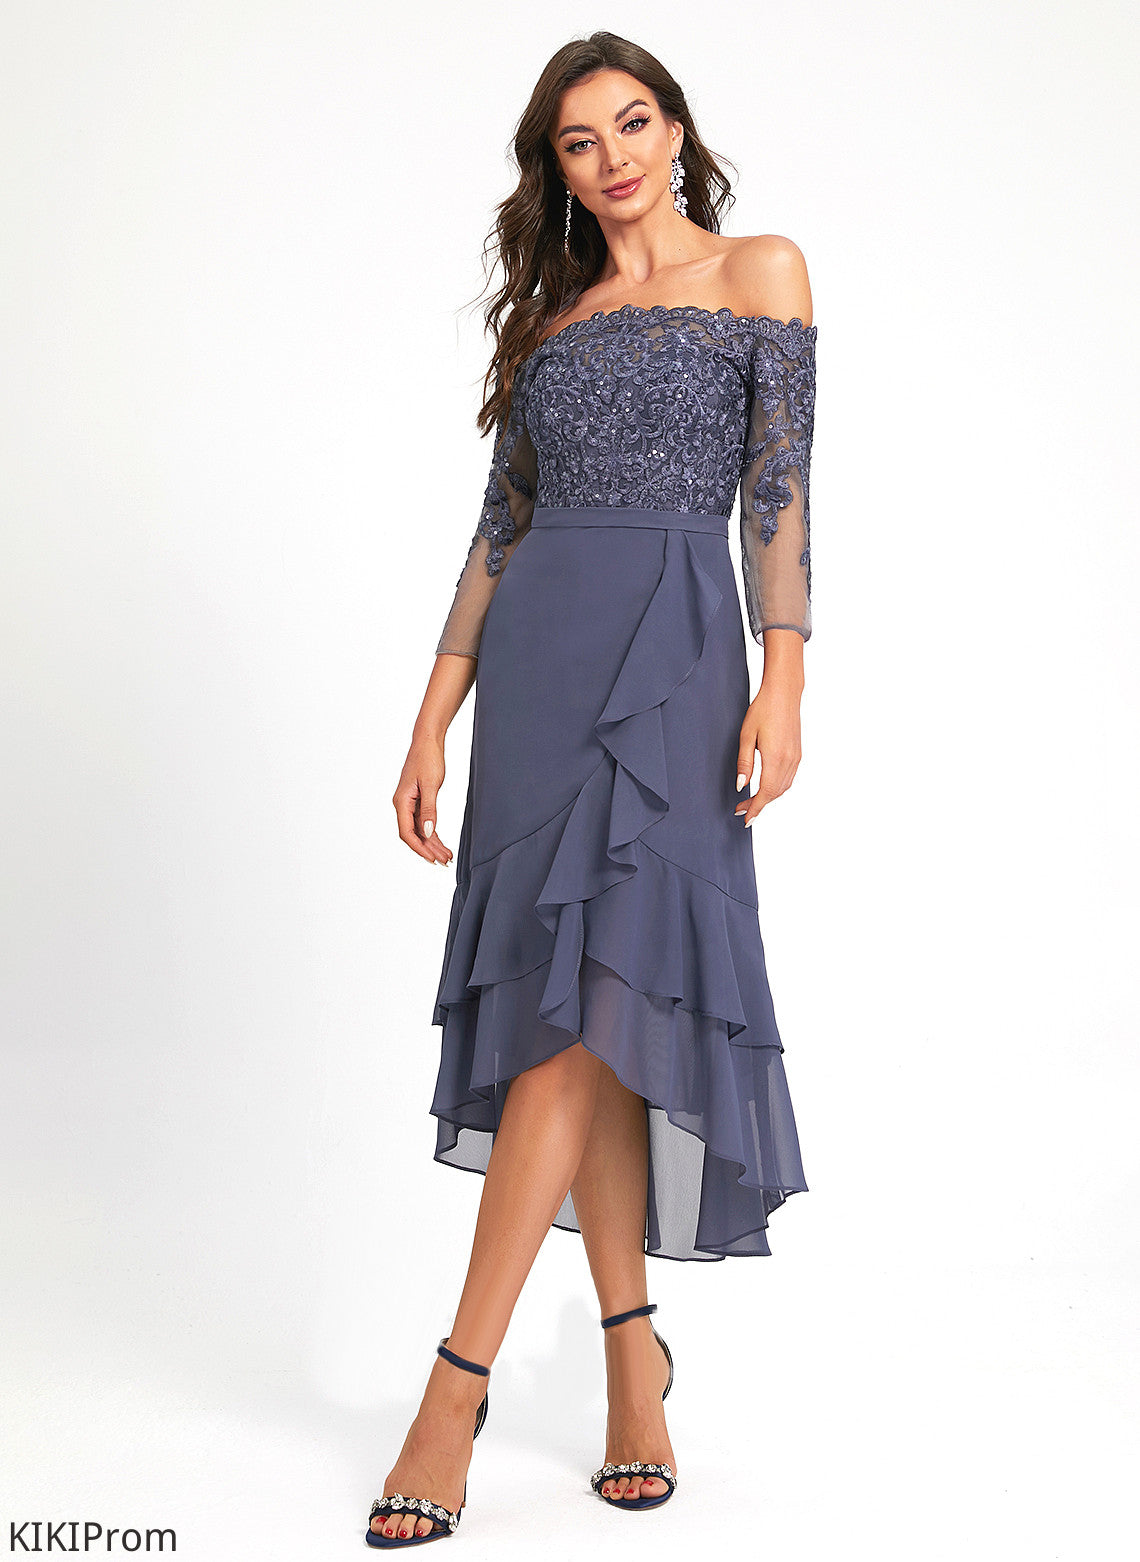 Chiffon Trumpet/Mermaid Asymmetrical Sequins Cocktail Dresses With Dress Cocktail Delaney Off-the-Shoulder